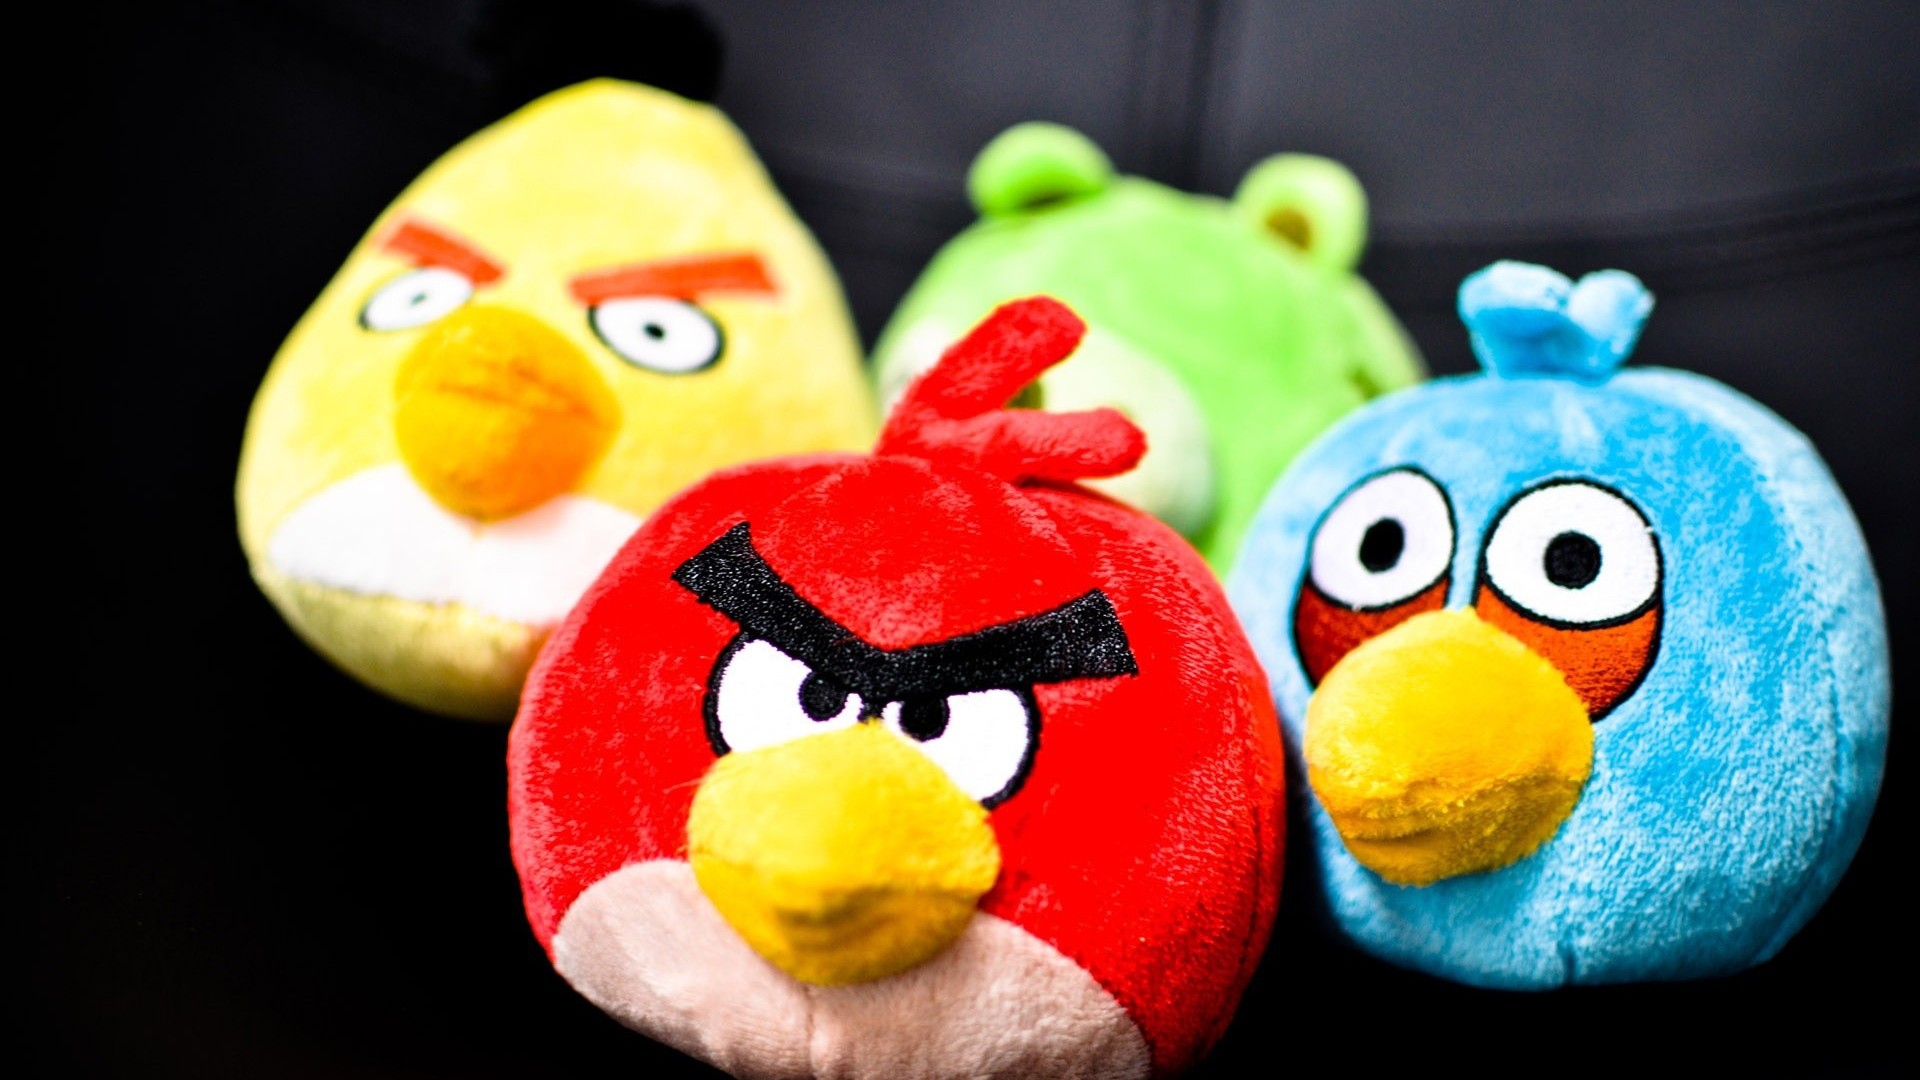 Plush Angry Birds Wallpaper - High Definition, High Resolution HD Wallpapers  : High Definition, High Resolution HD Wallpapers